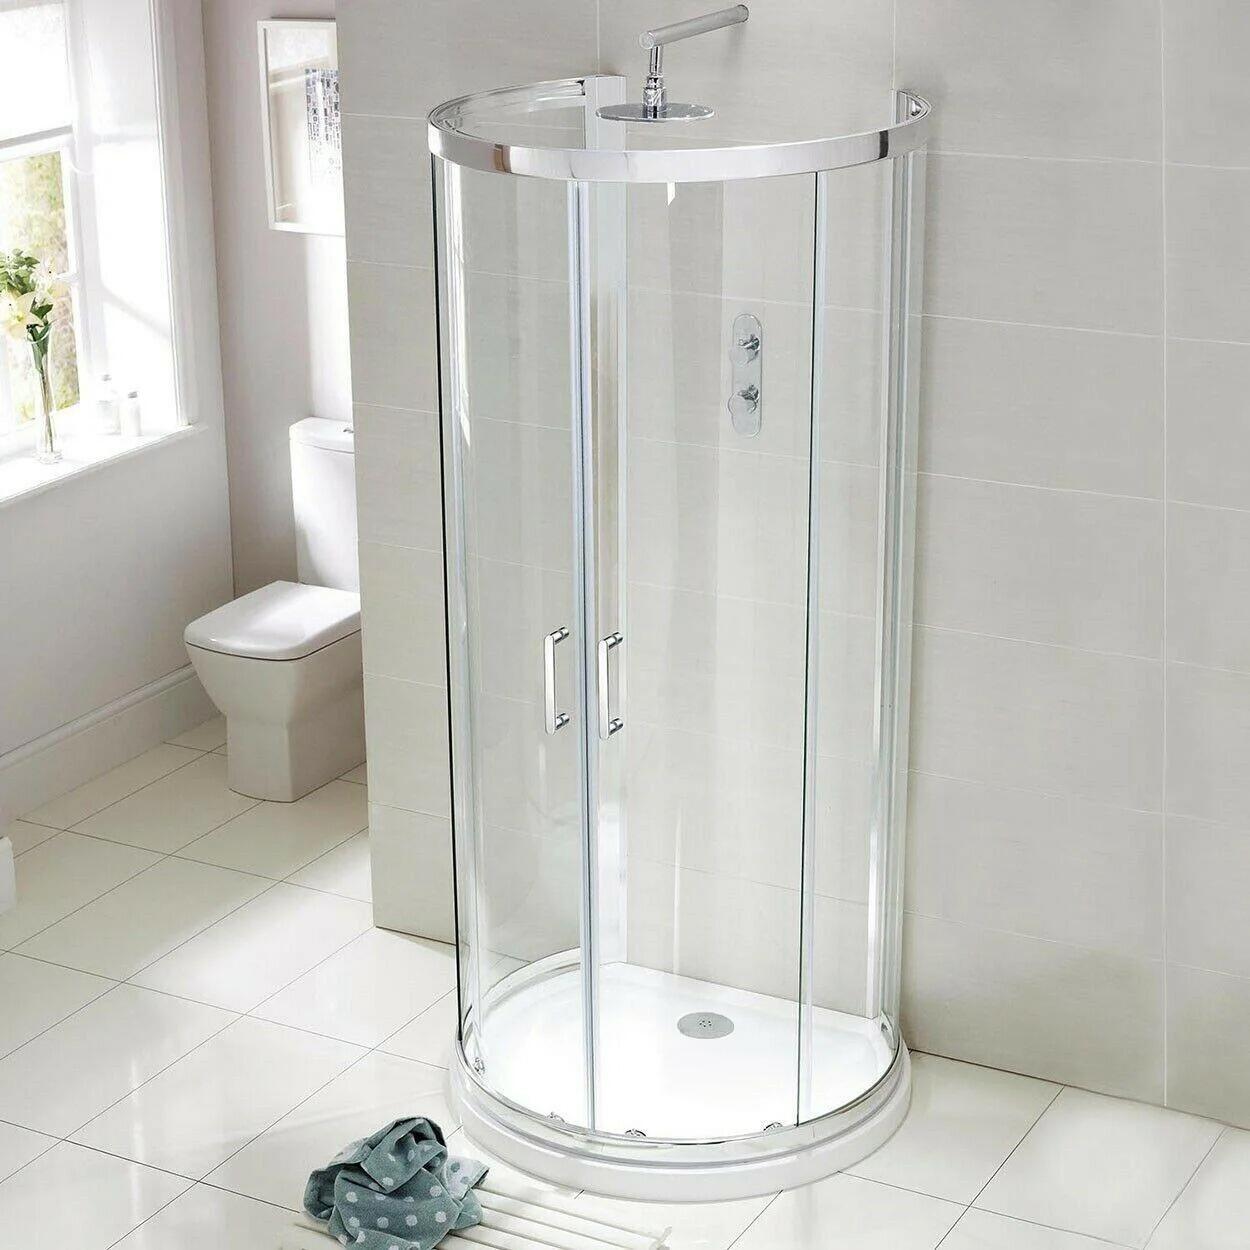 An image of Aqualusso 900Mm X 770Mm Compact D Shape Shower Enclosure One Wall Quadrant Glass...